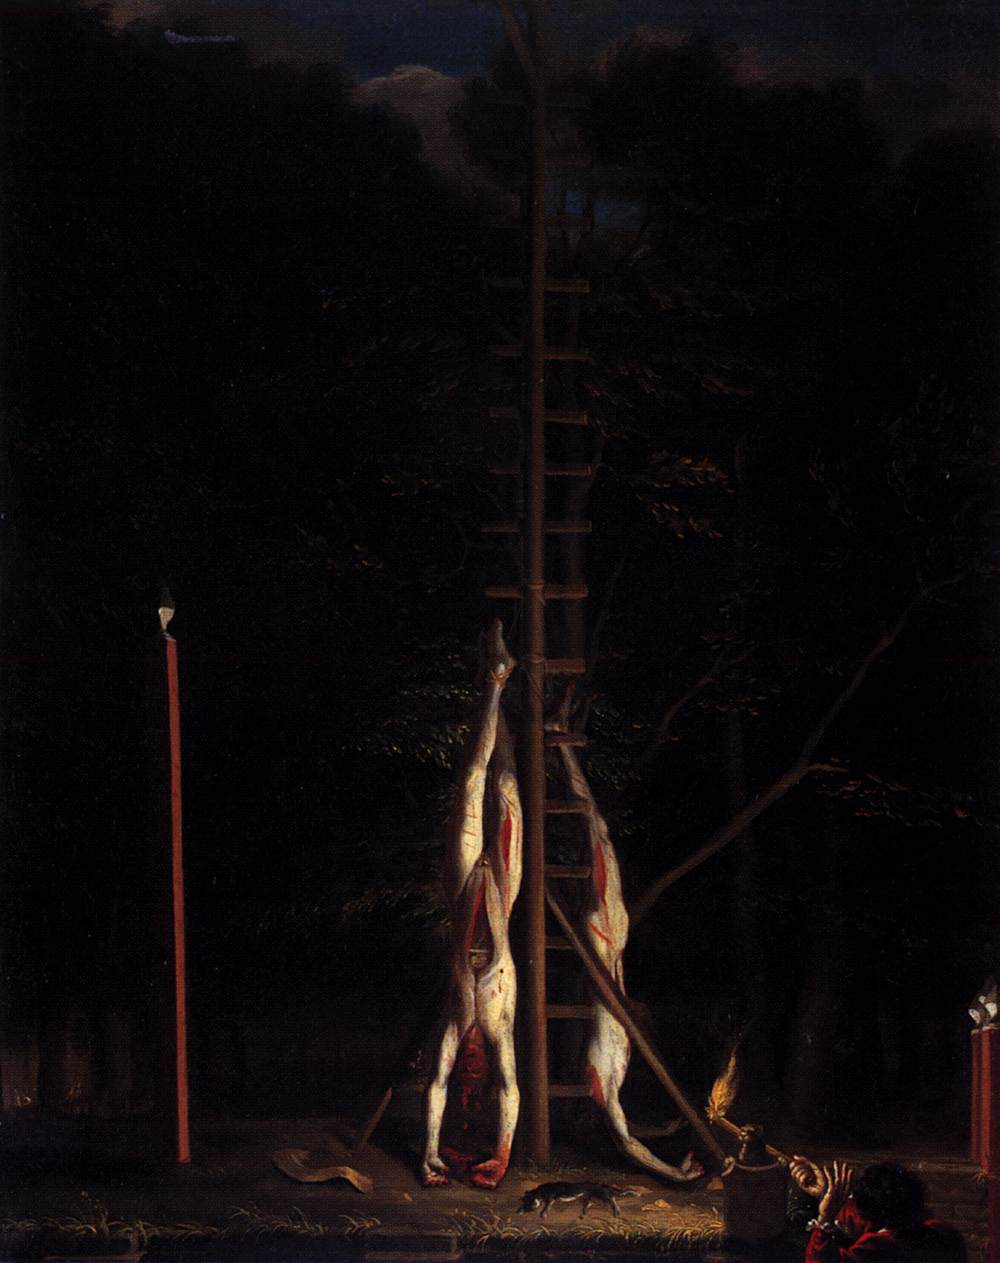 A famous painting depicting two men hanging from a ladder.